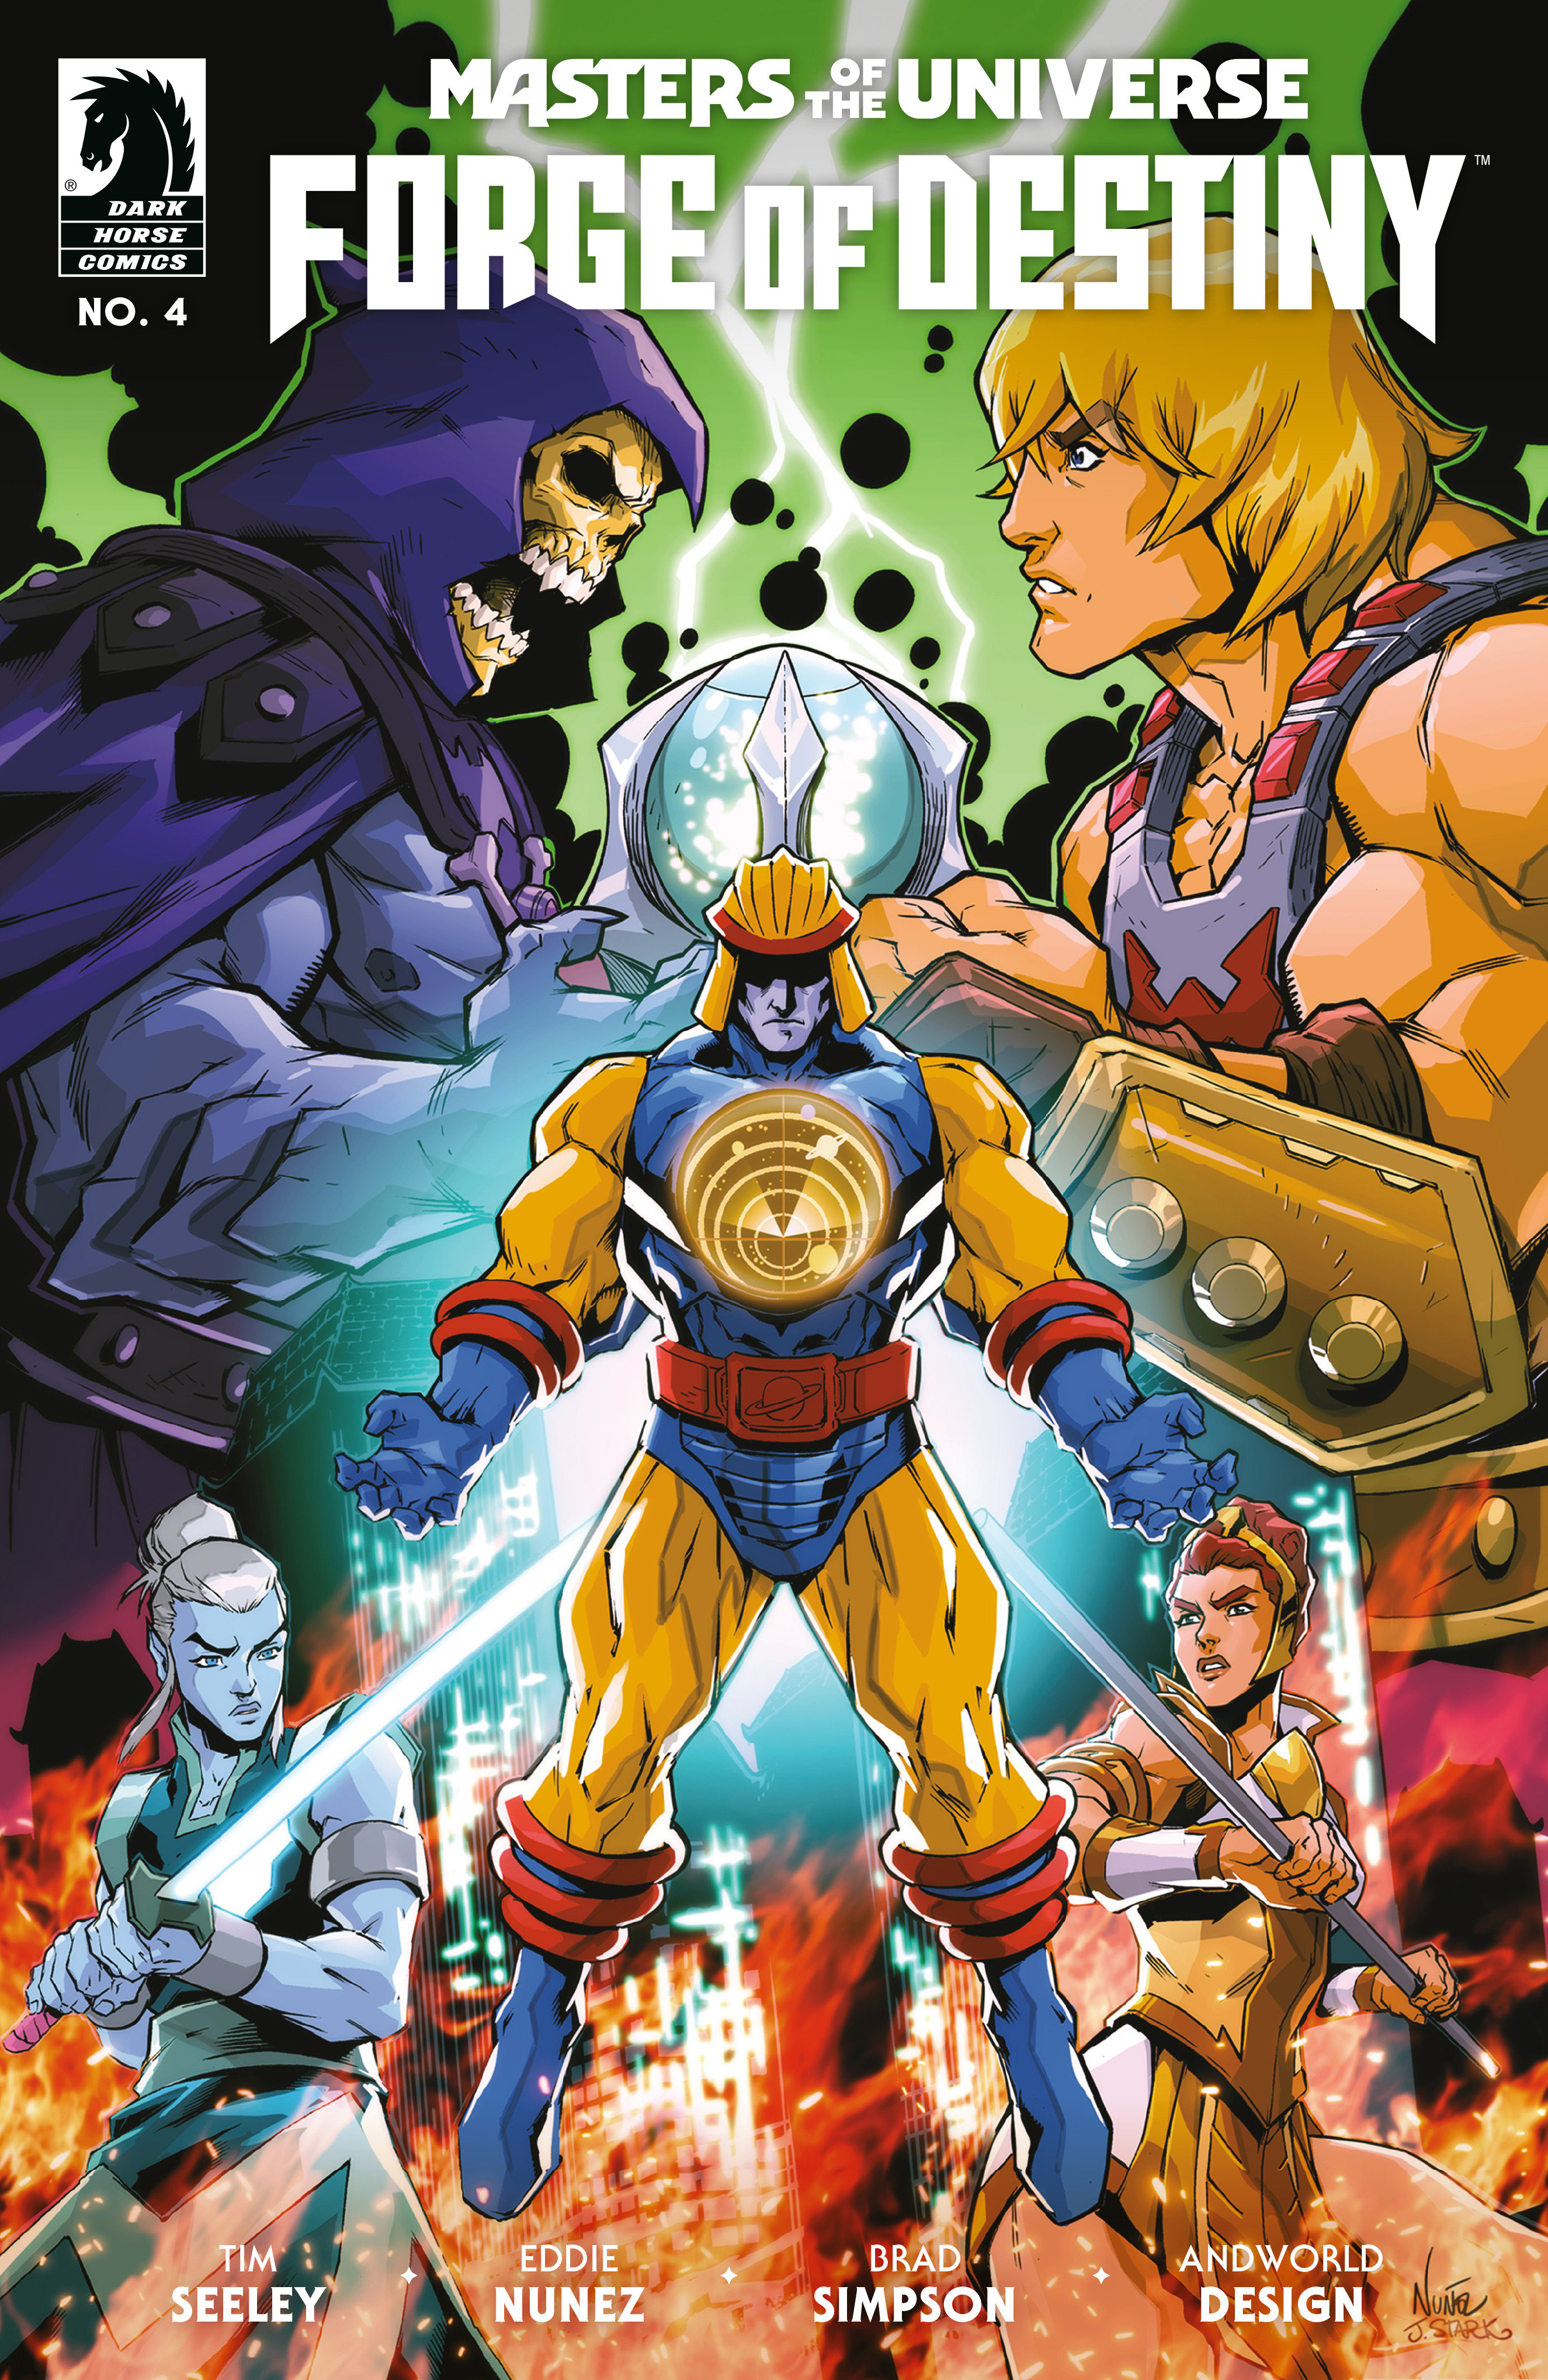 Masters of the Universe: Forge of Destiny #4 Cover A (Eddie Nunez)